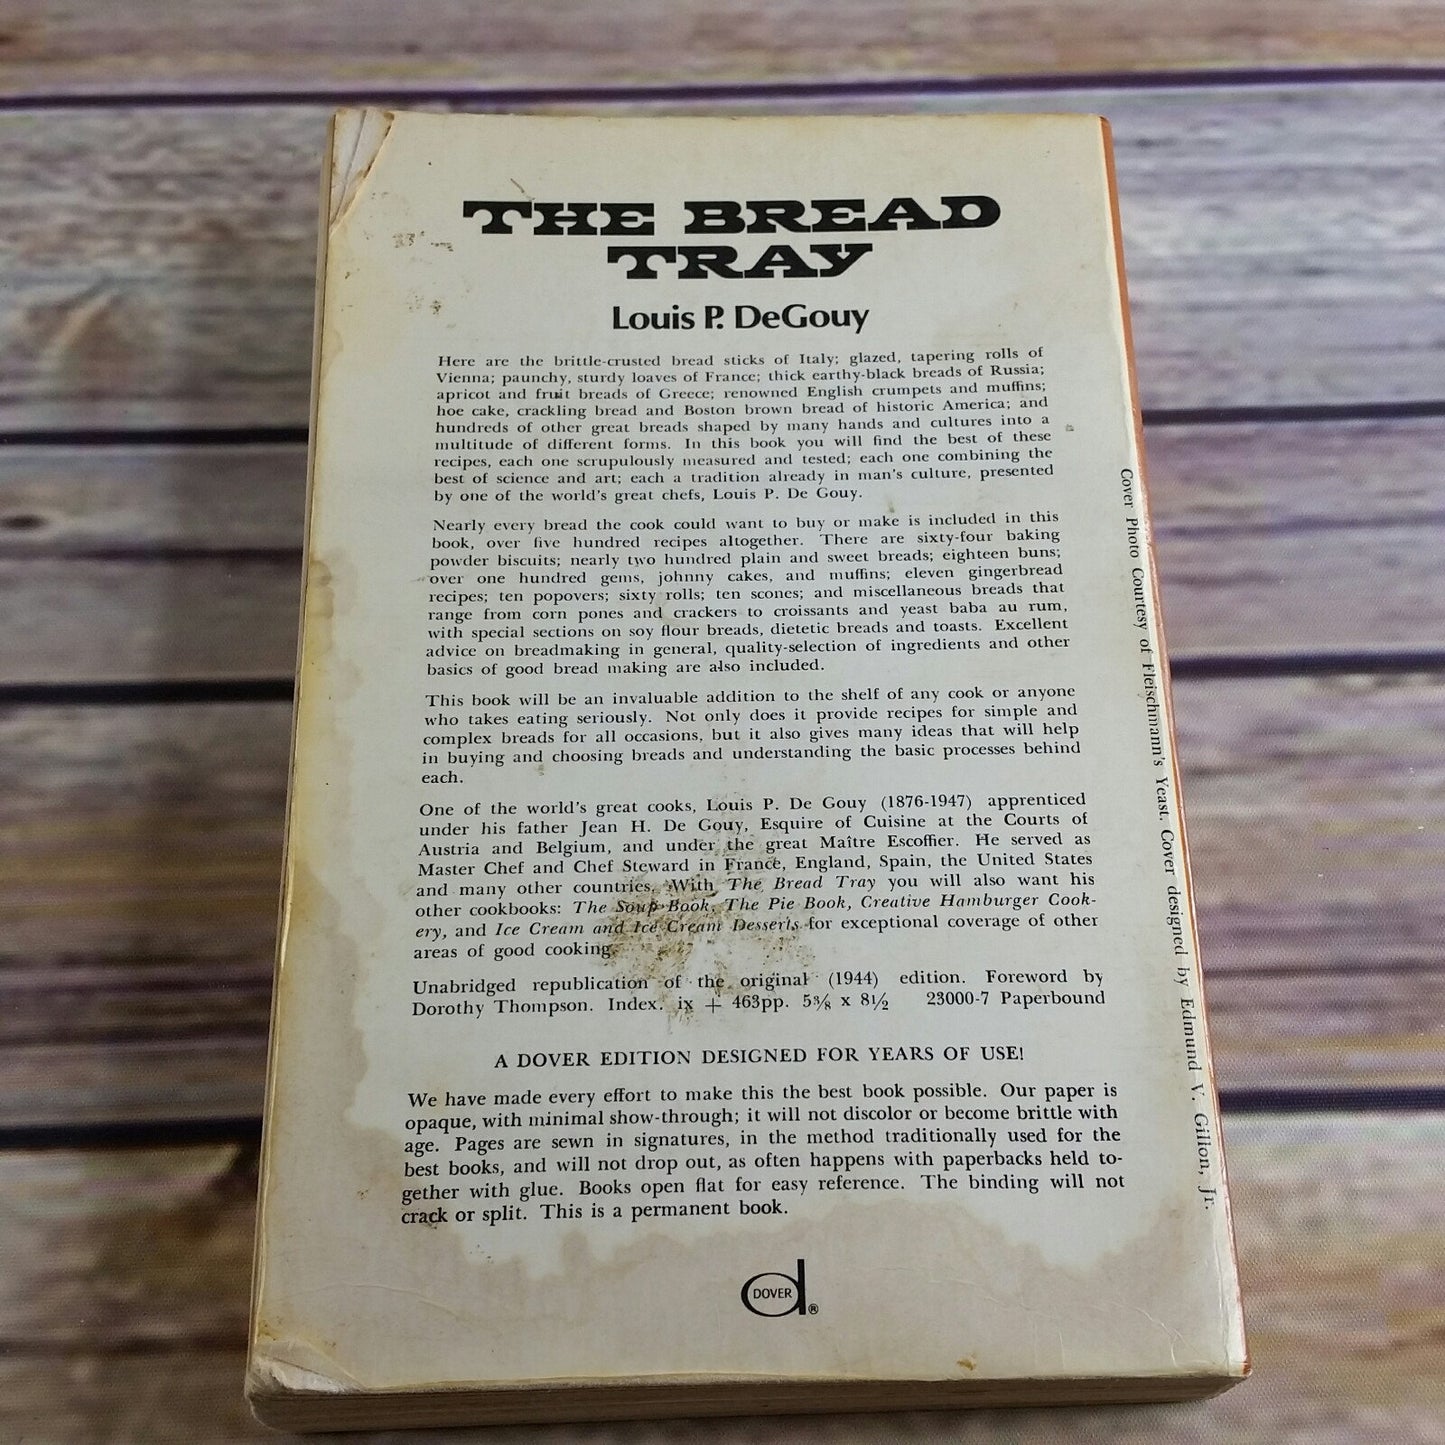 Vintage Cookbook The Bread Tray Bread Recipes Louis DeGouy 1972 Paperback Homemade Breads Rolls Muffins Biscuits 500 Plus Recipes